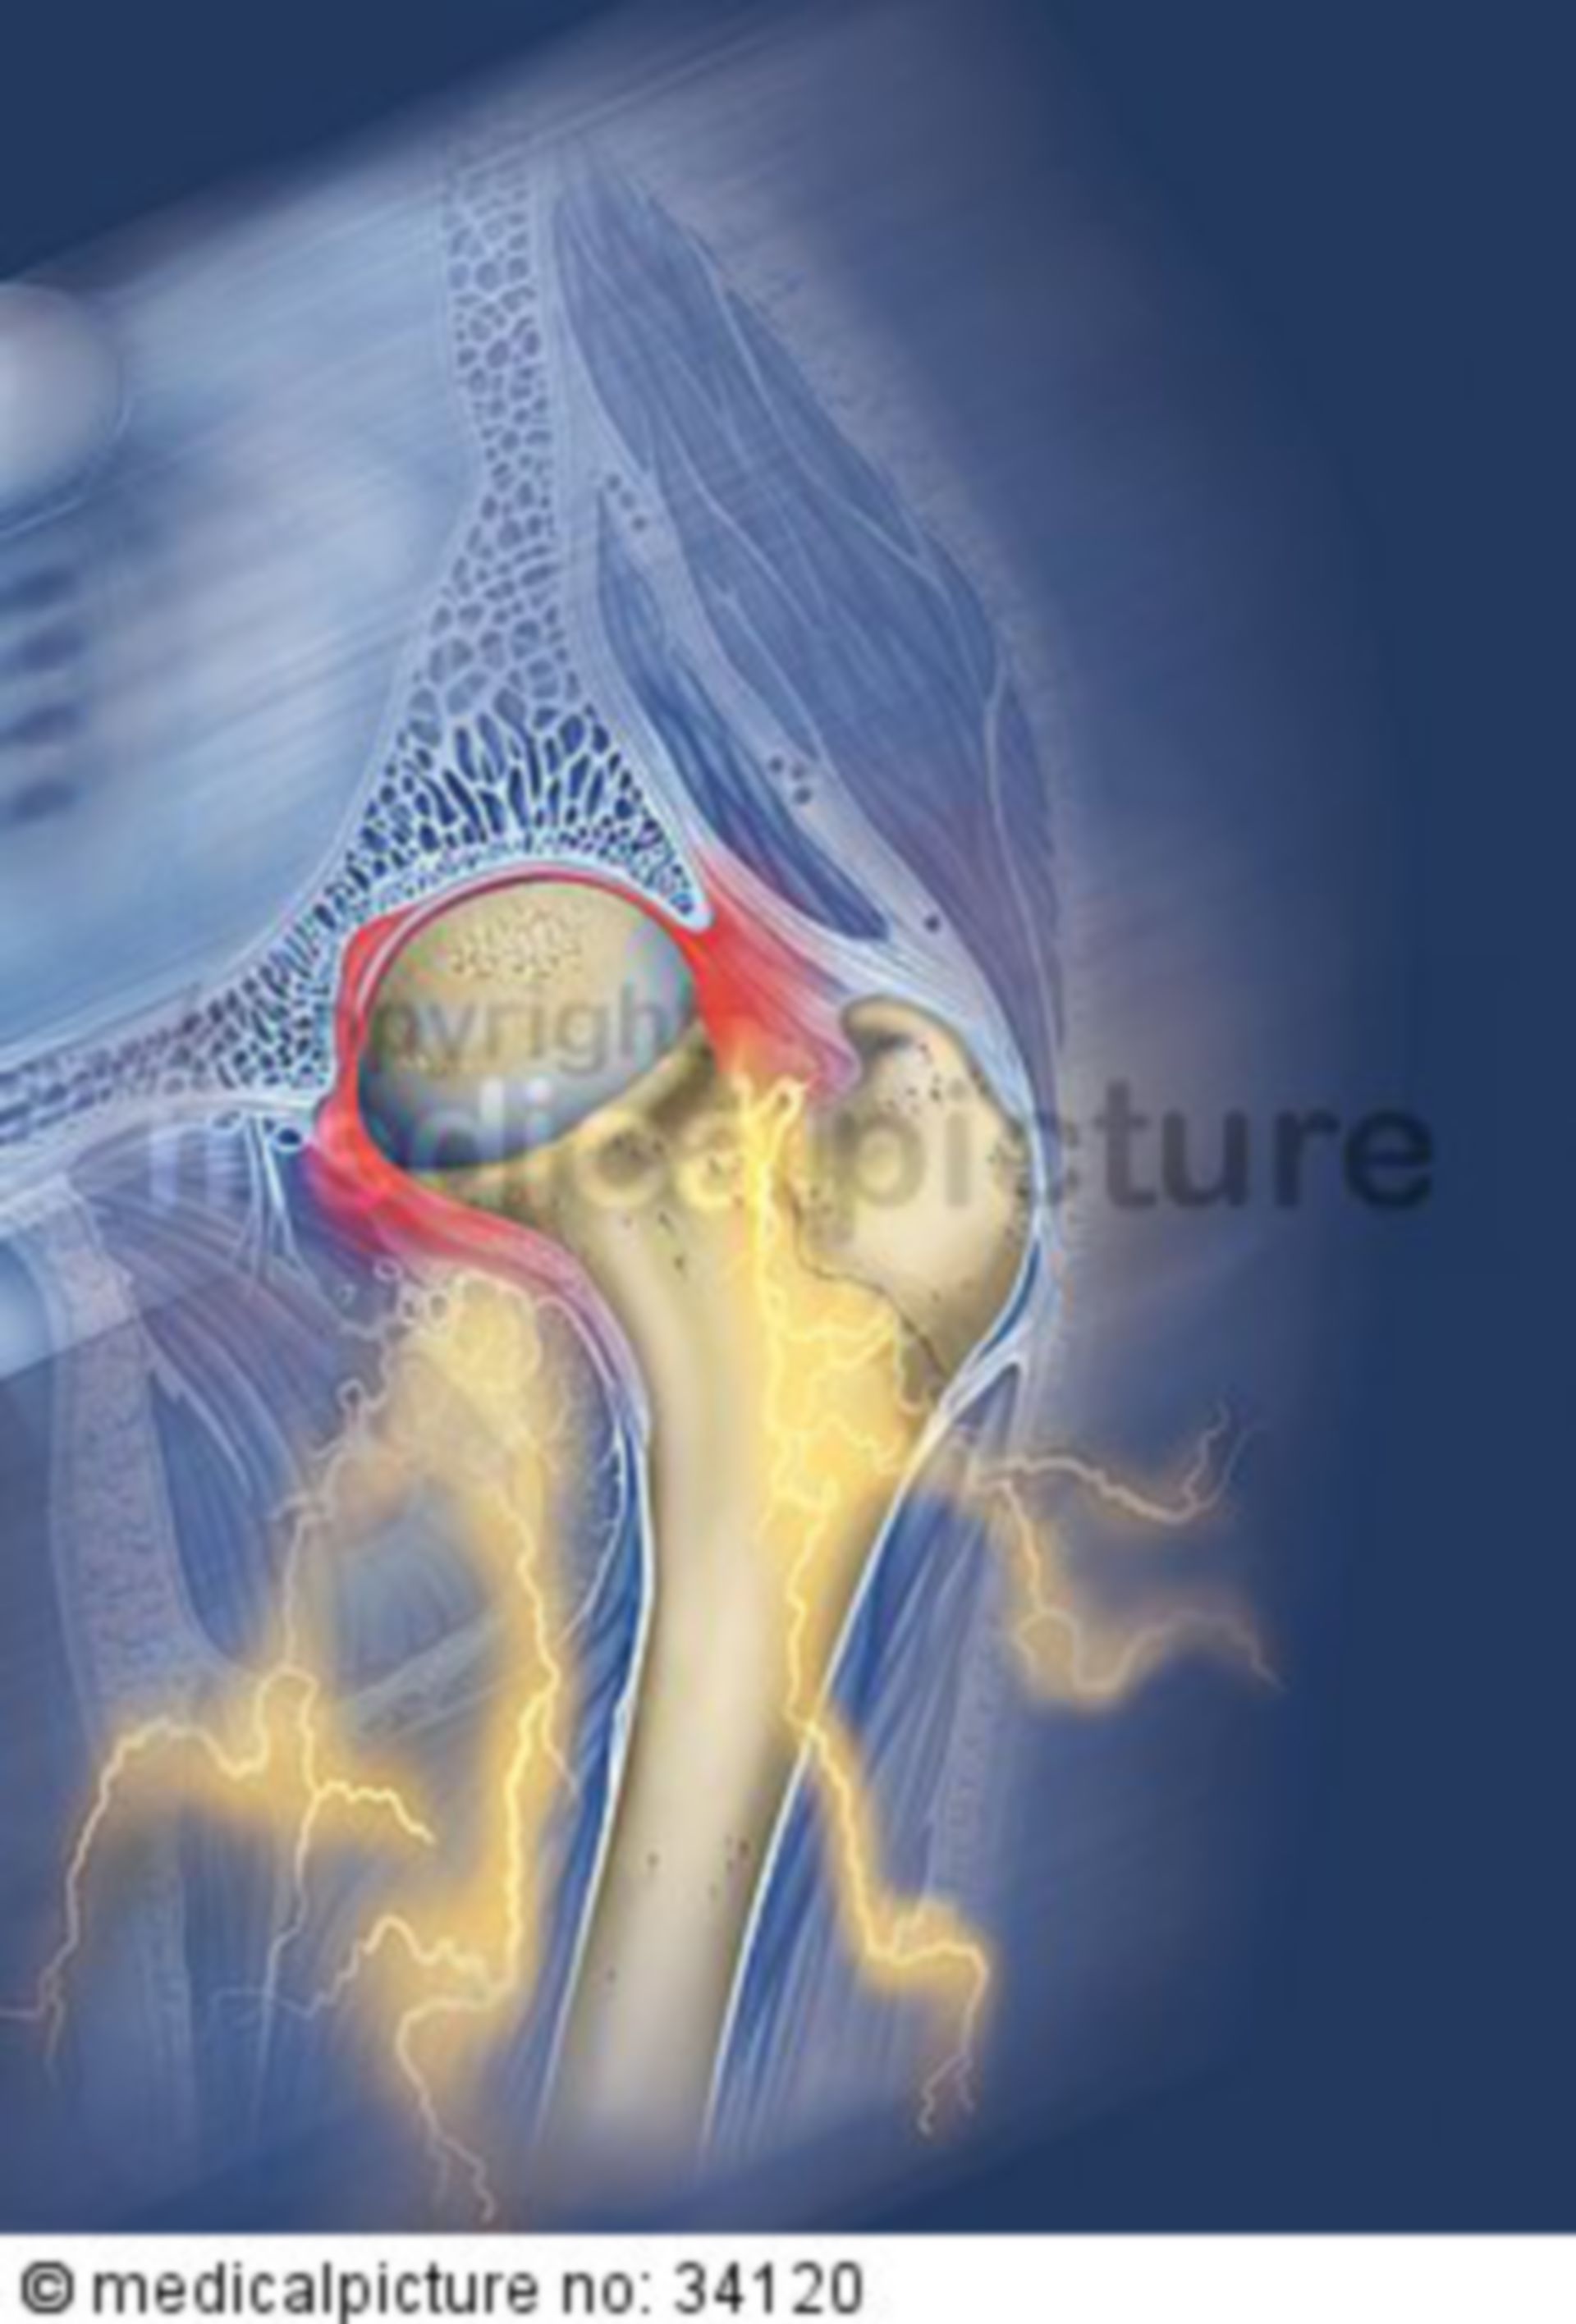 Arthrosis of the hip joint (coxarthrosis)